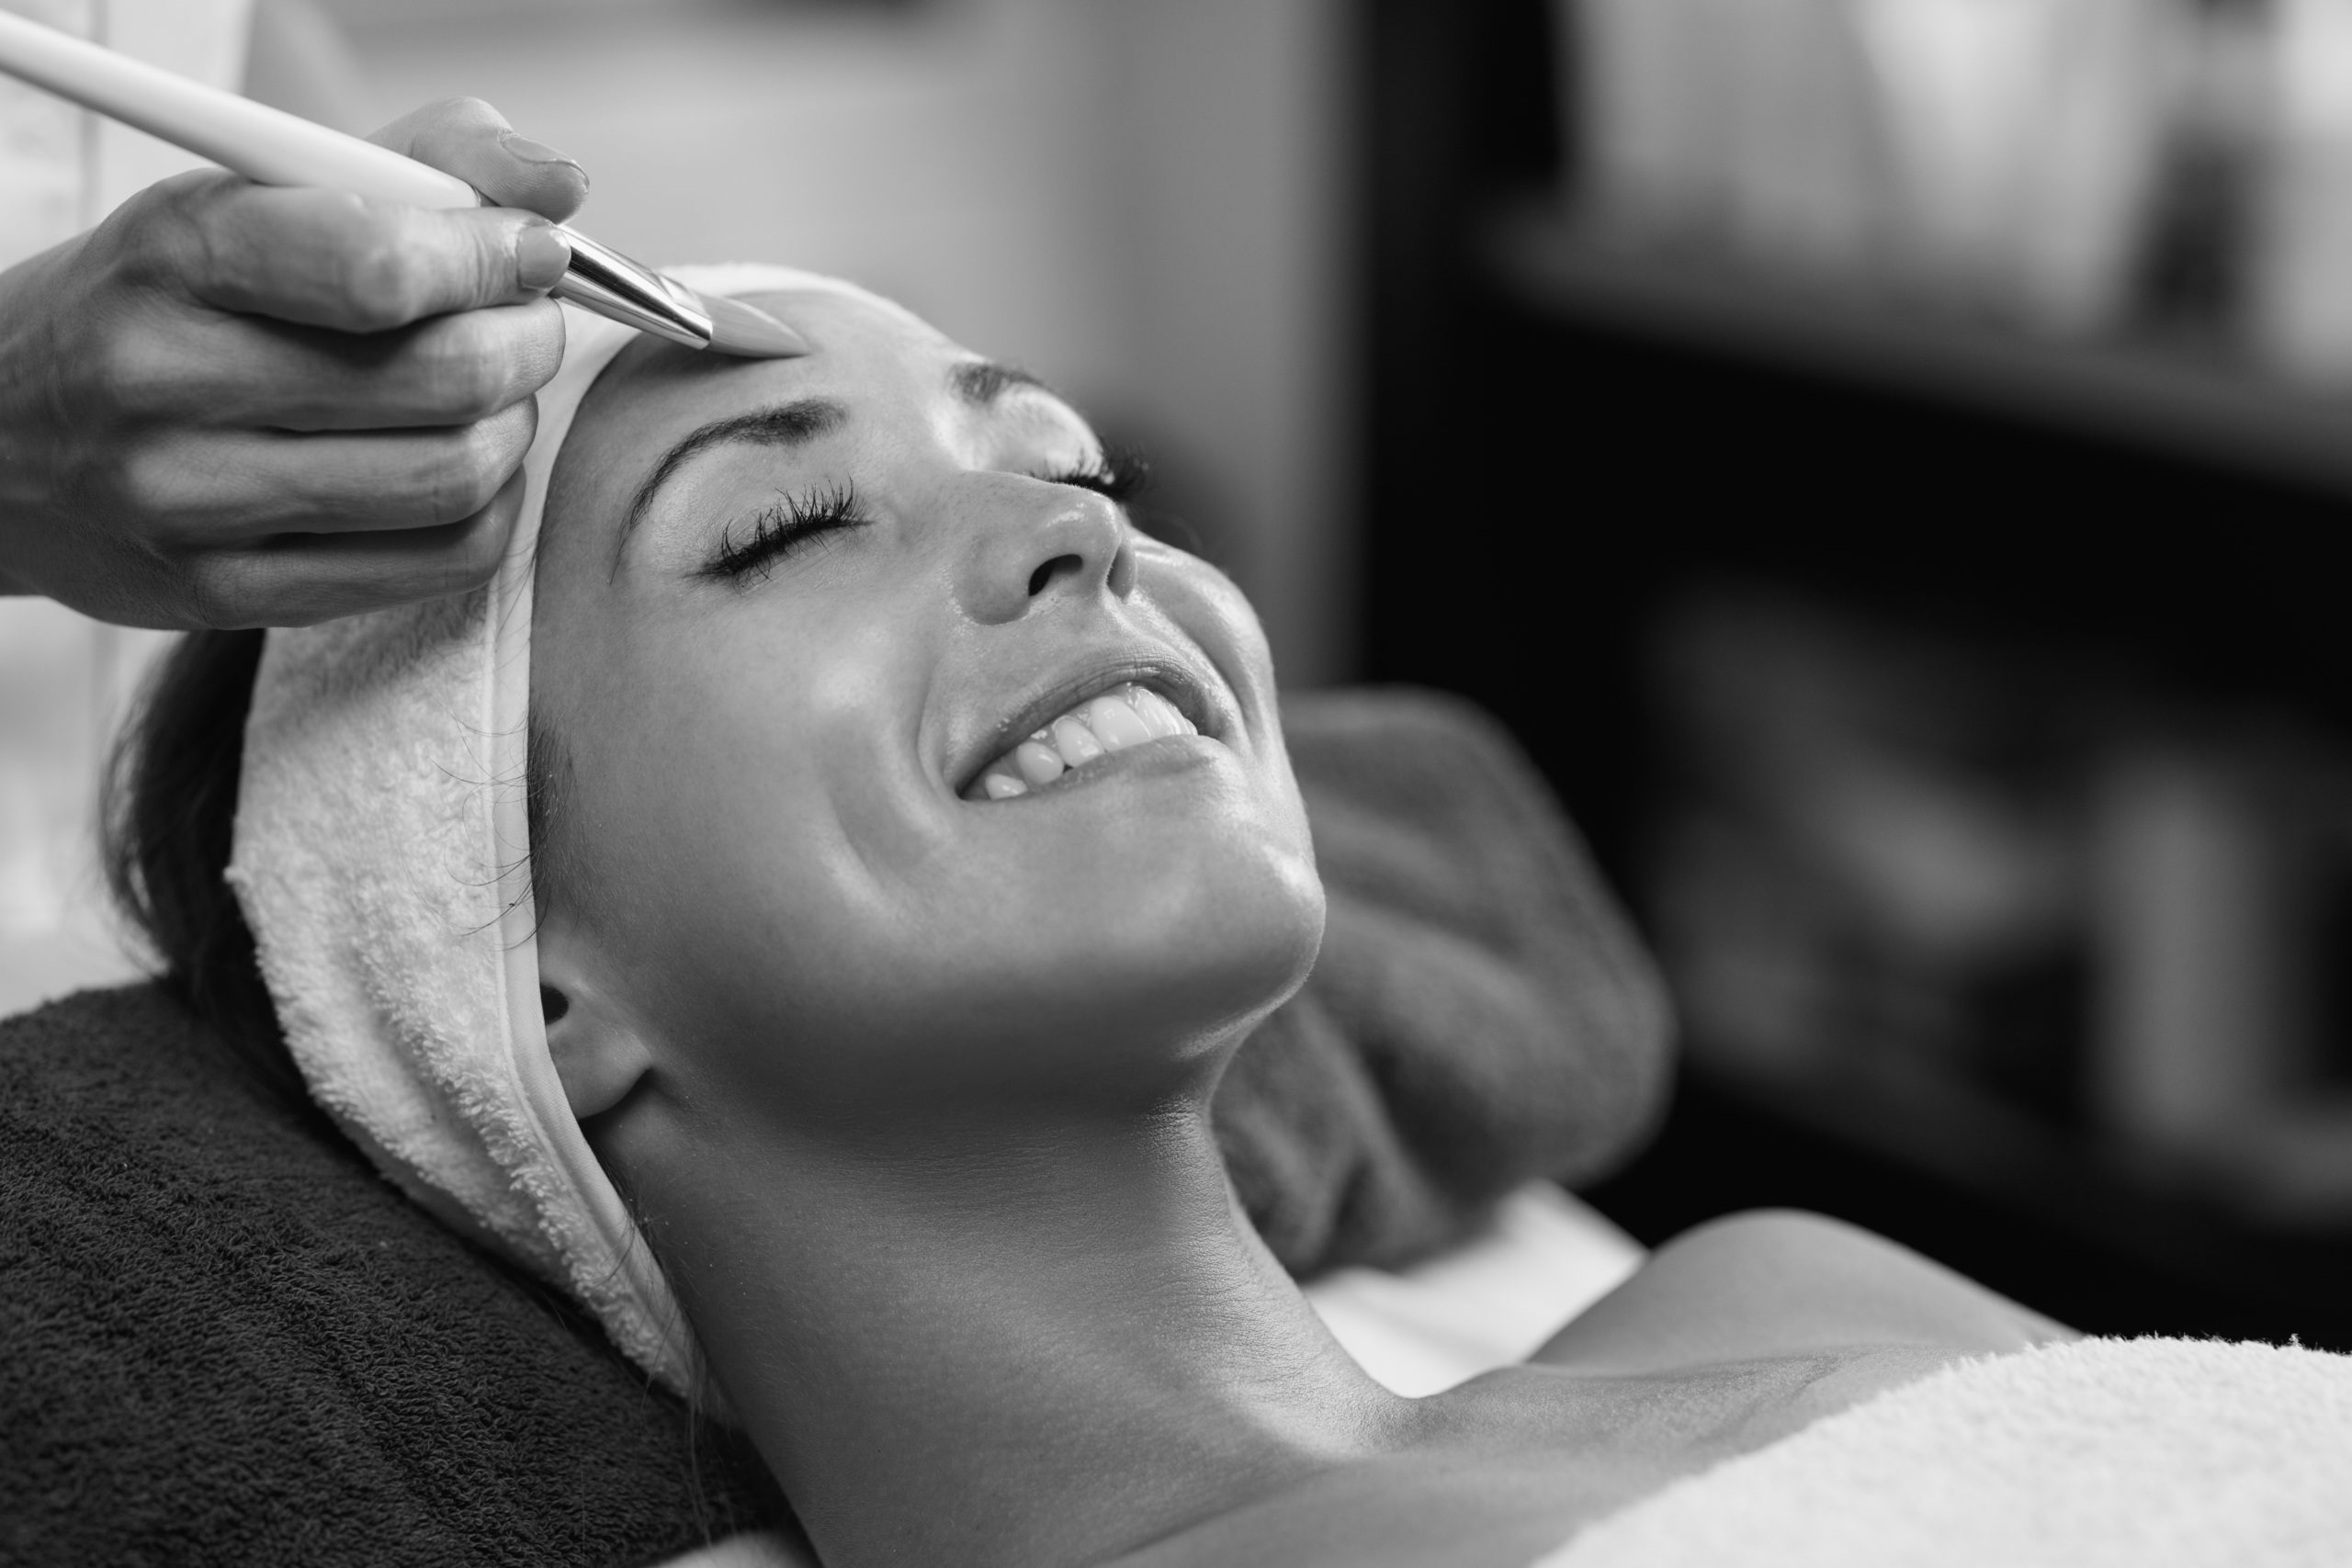 What Are The Benefits Of Chemical Peel?